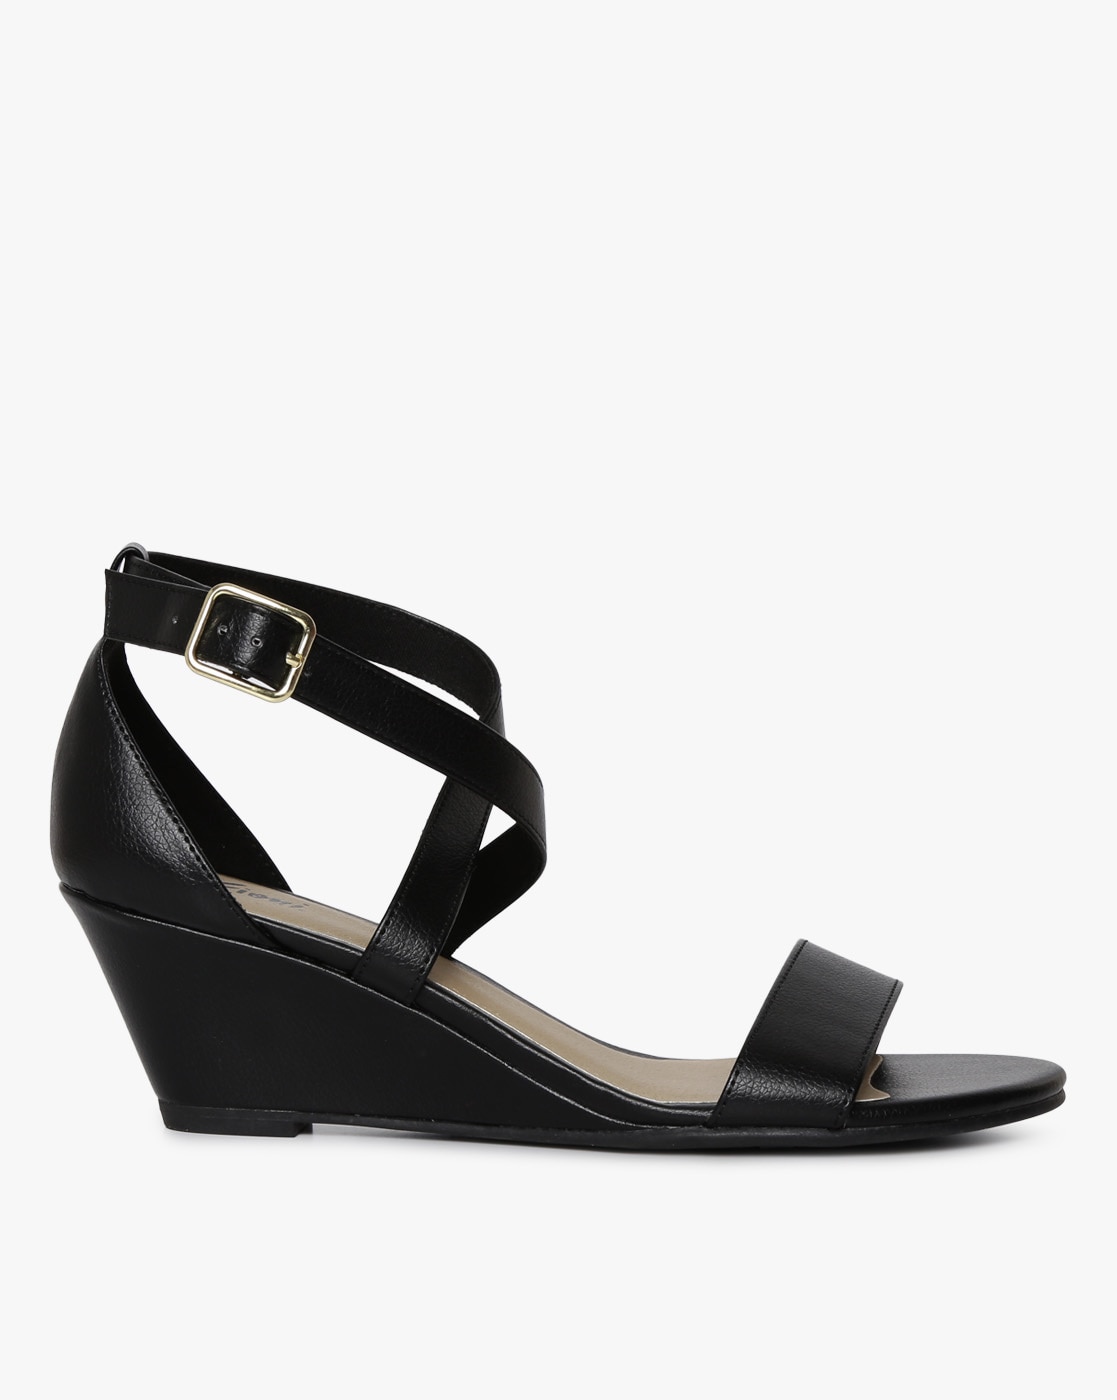 black open toe wedges with ankle strap